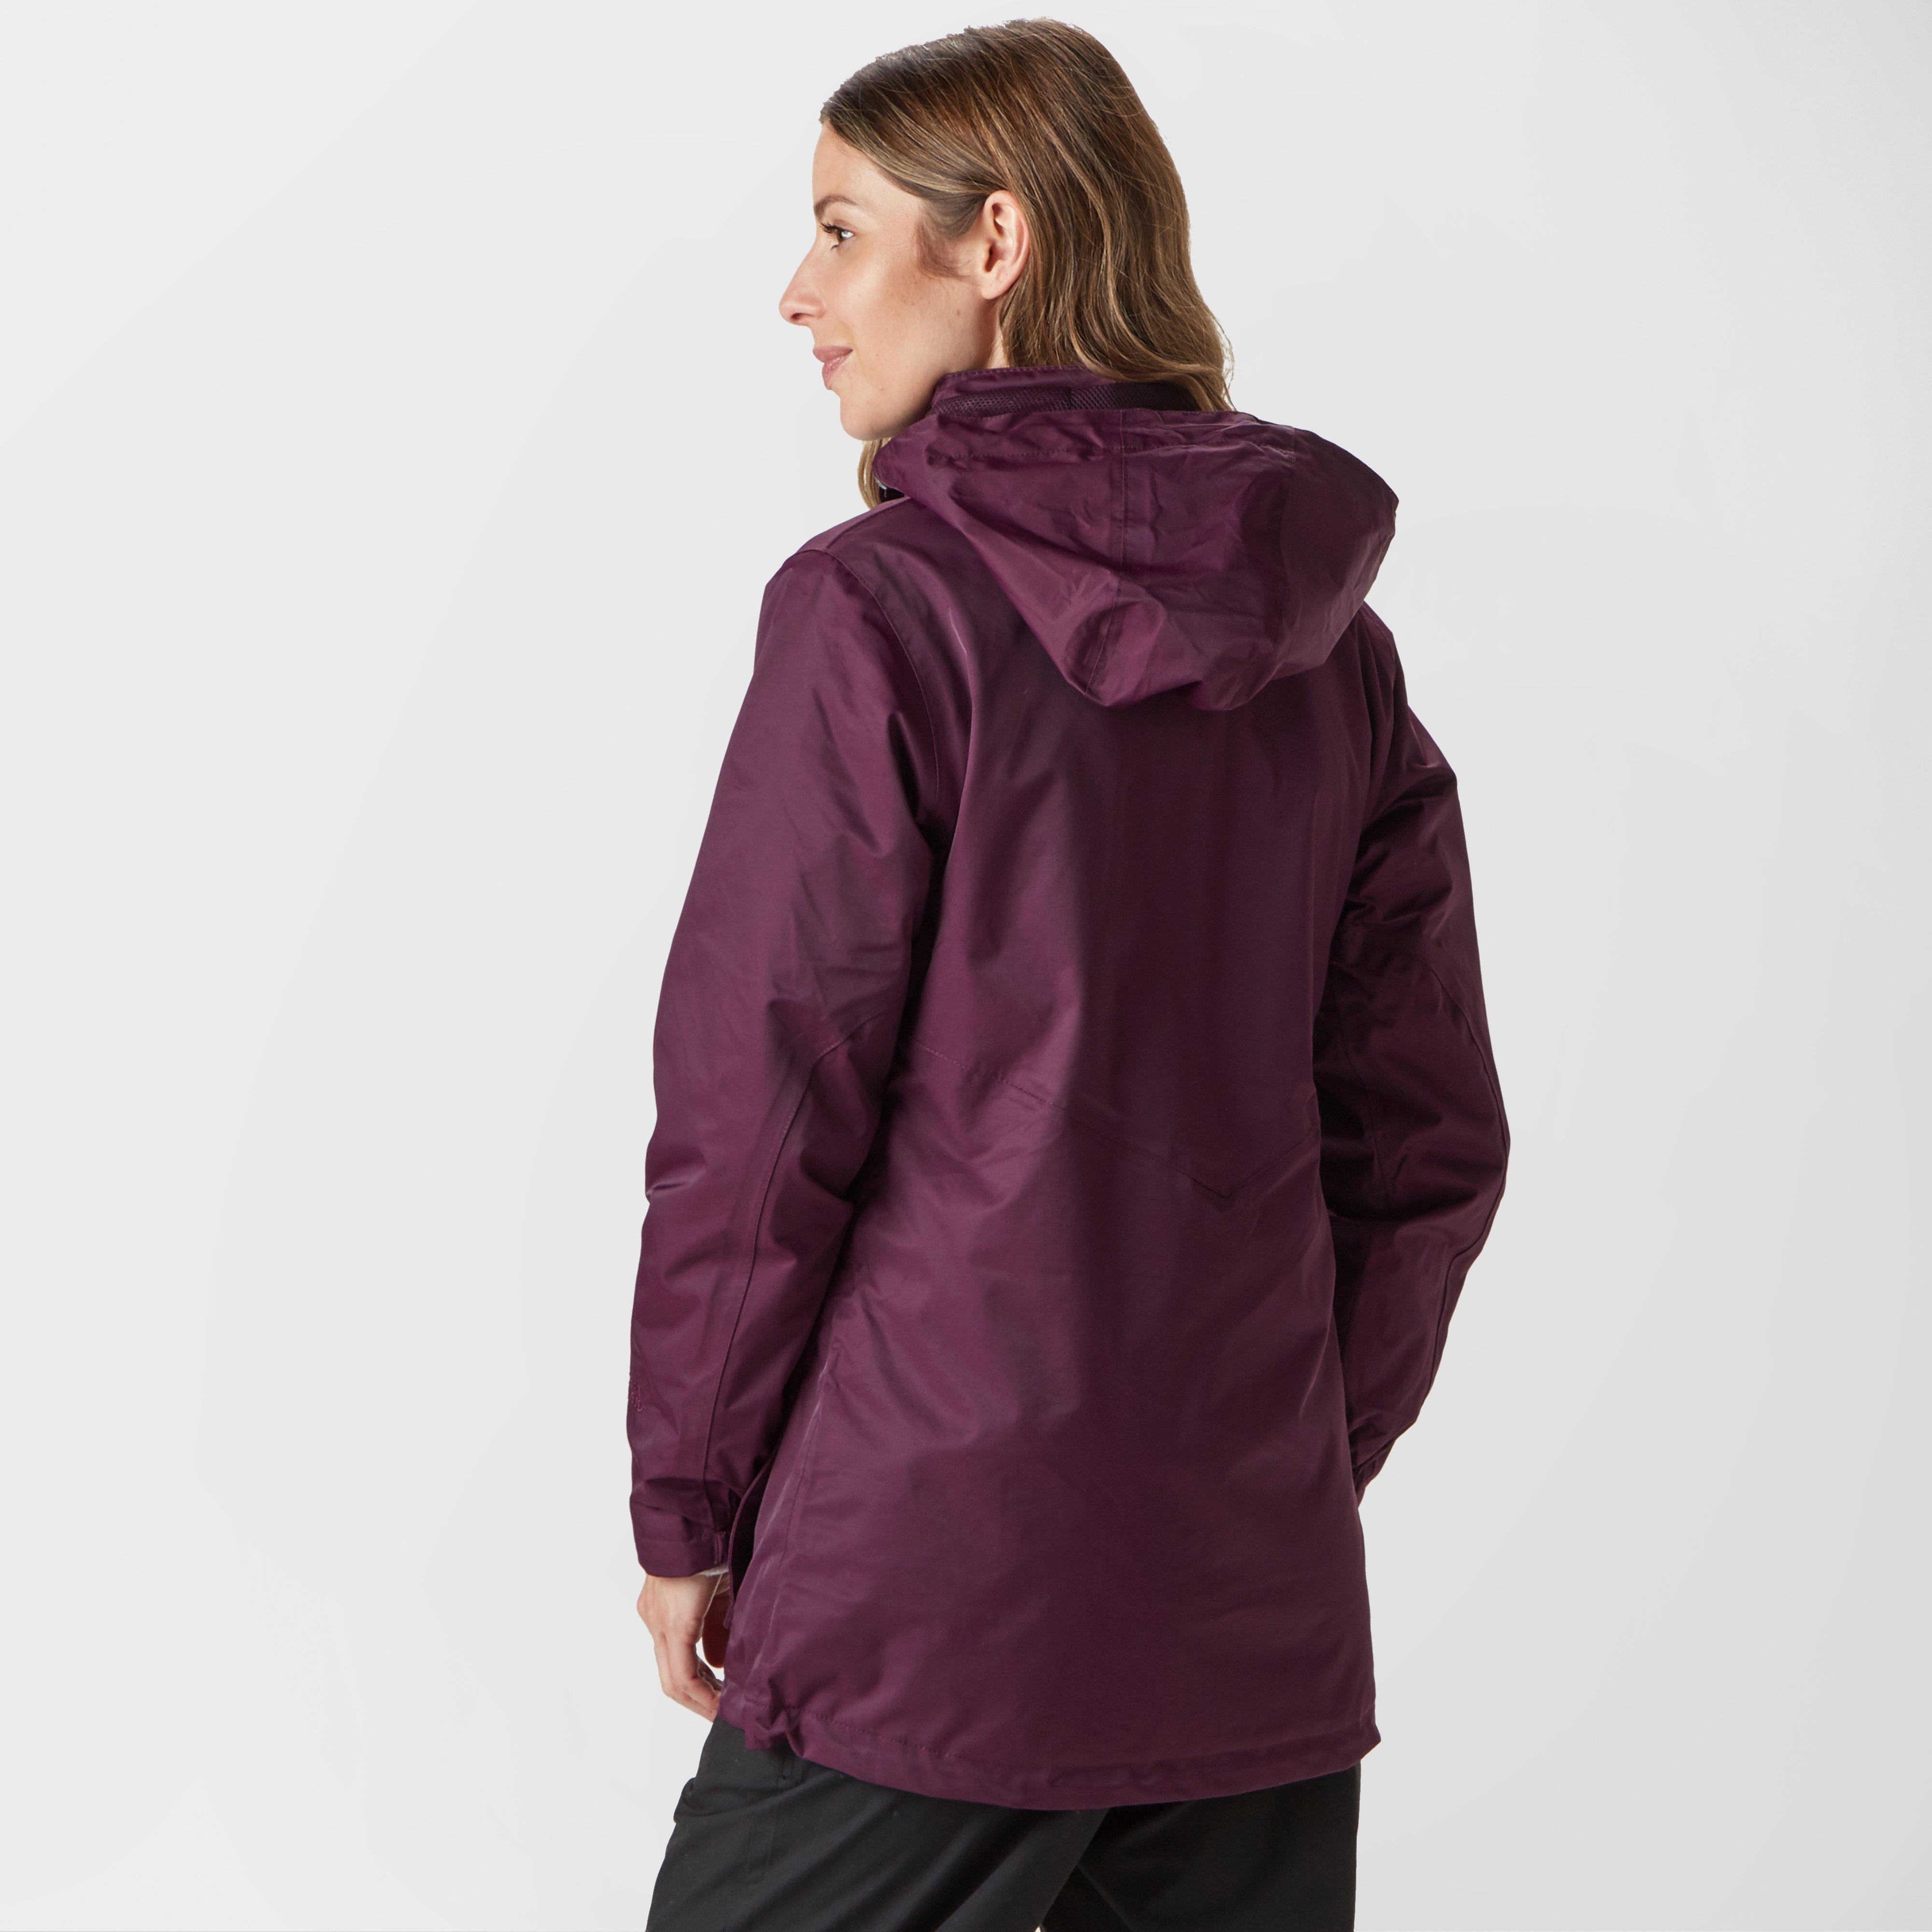 Peter Storm Women’s View 3 in 1 Jacket Review